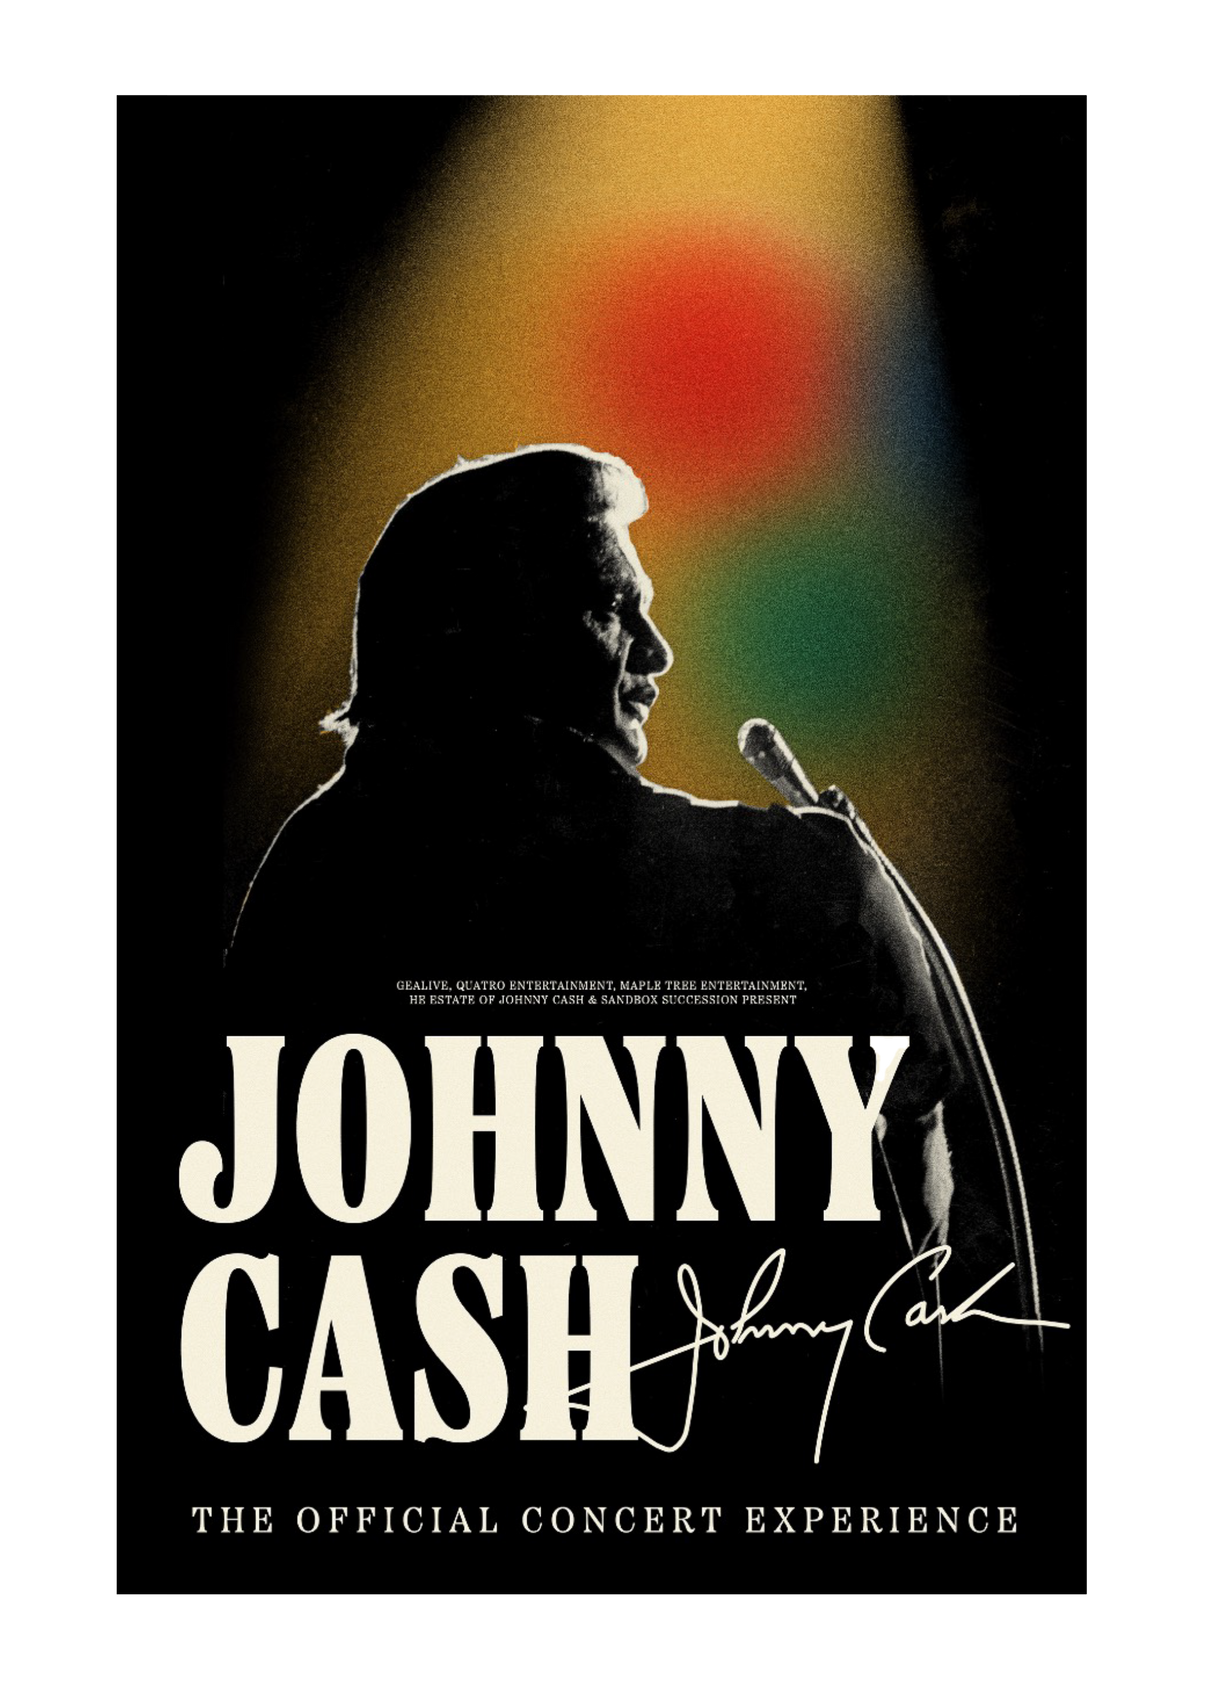 JOHNNY CASH: THE OFFICIAL CONCERT EXPERIENCE 11”x17” LITHOGRAPH ...